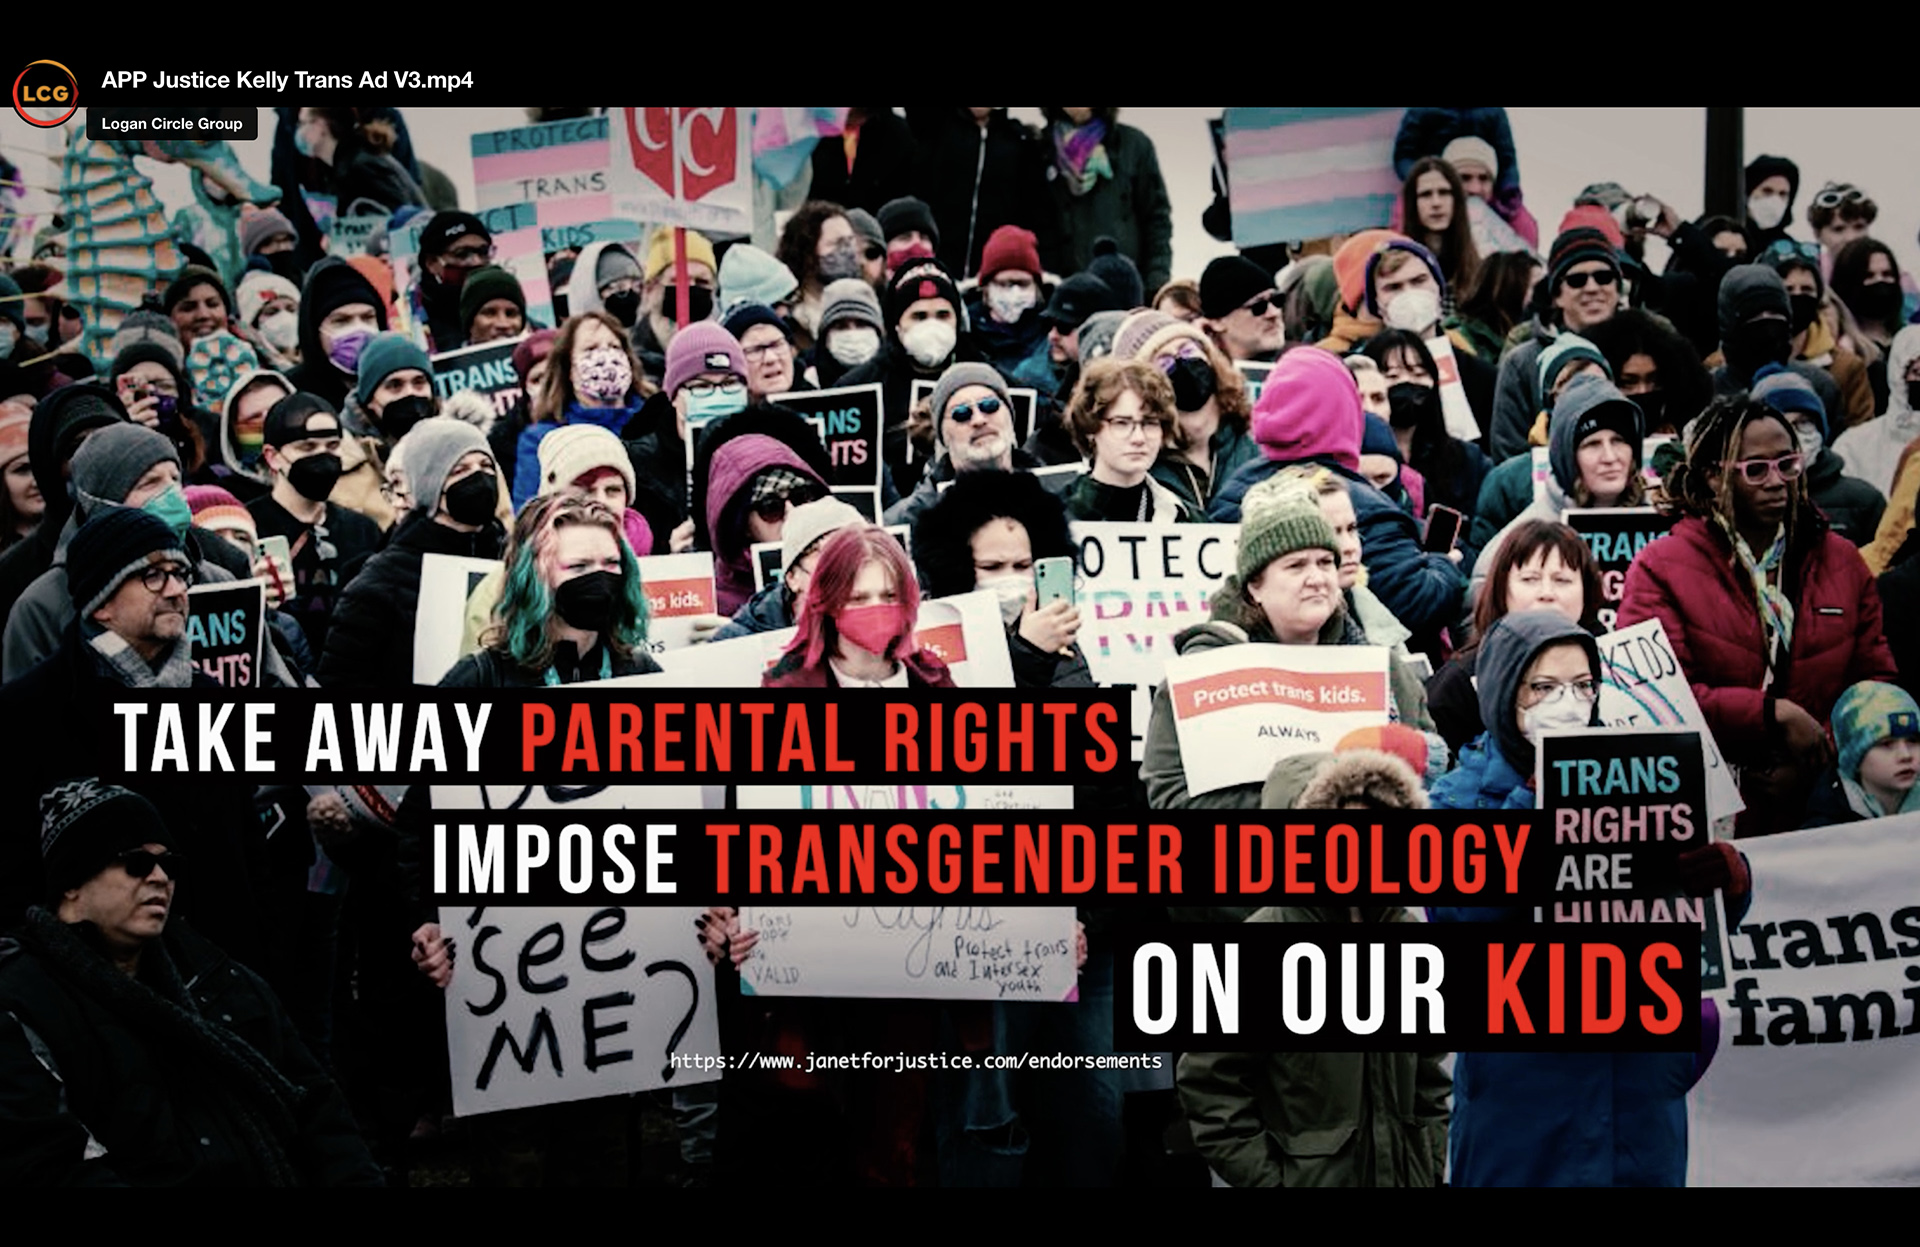 A still image from a video shows a group of protestors superimposed with the text "Take Away Parental Rights," "Impose Transgender Ideology" and "On Our Kids."